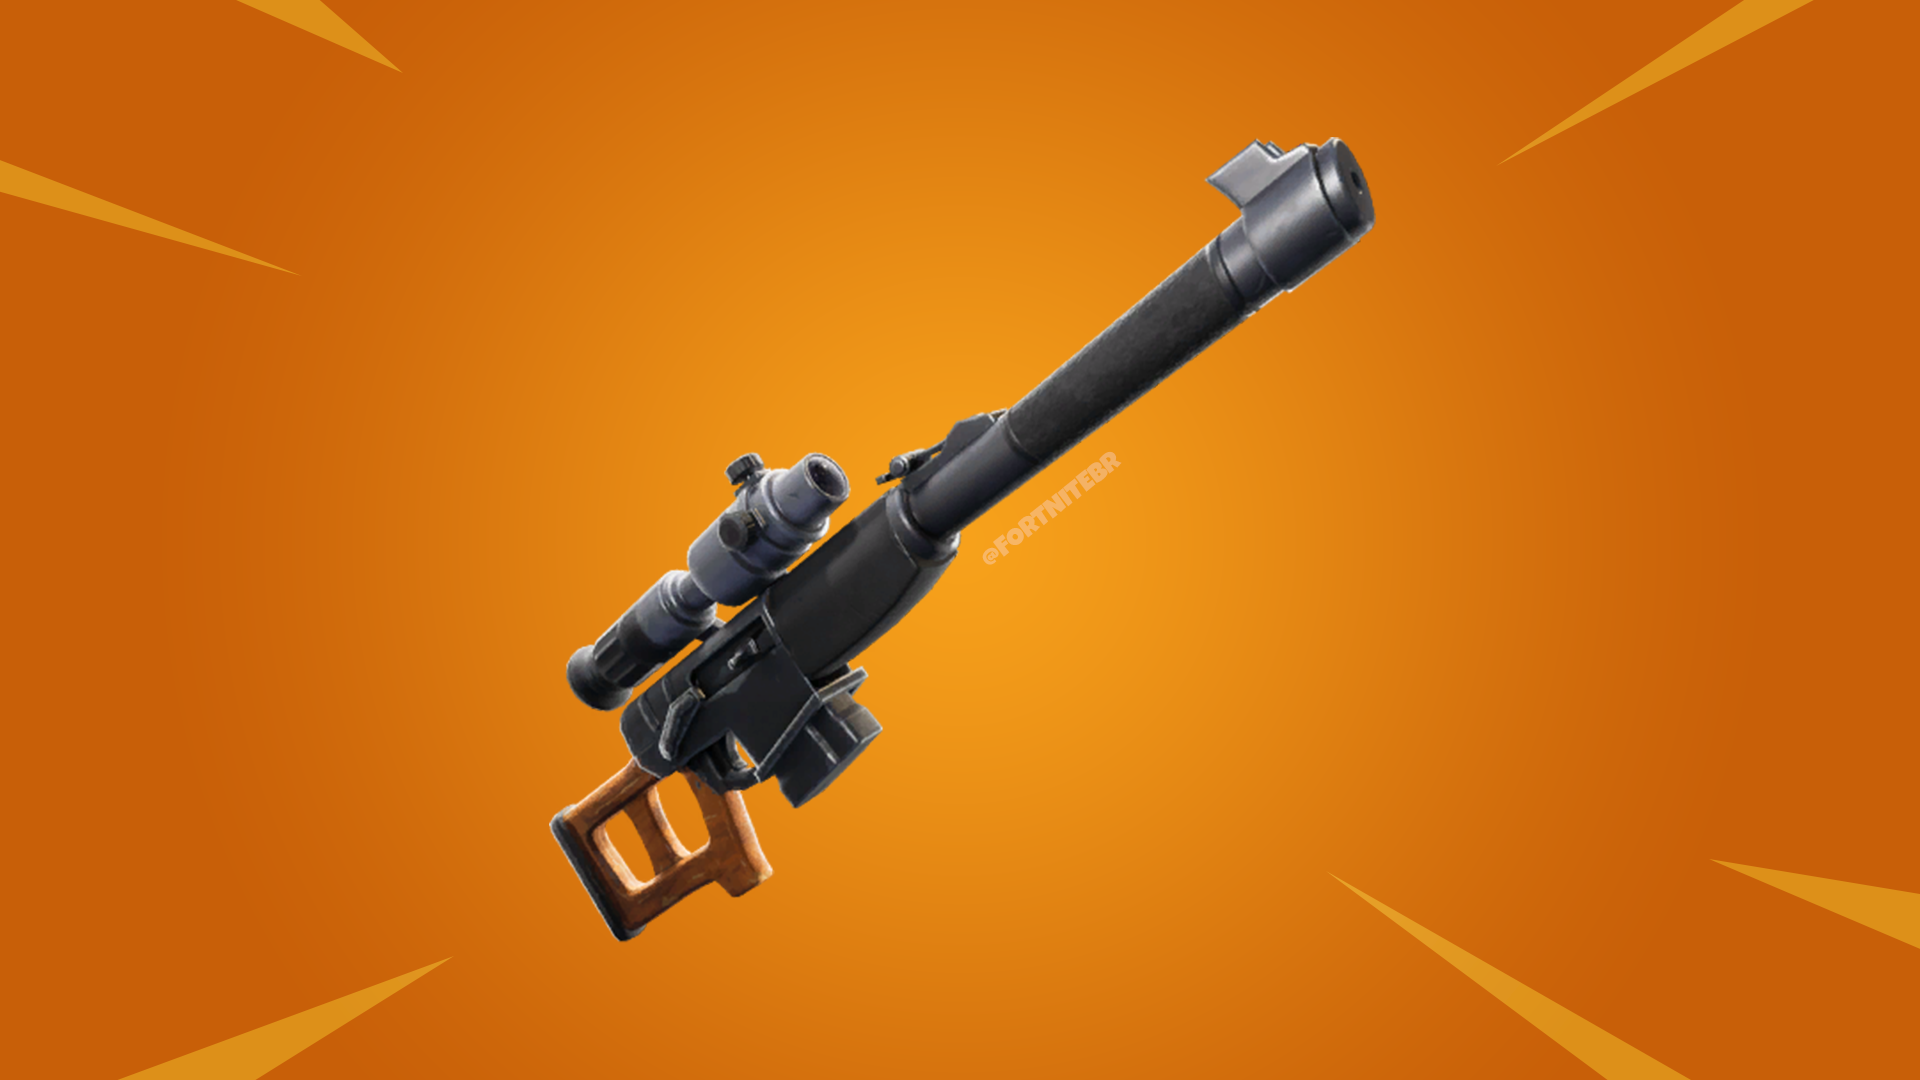 Leak: Automatic Sniper Rifle Coming to Fortnite Battle Royale